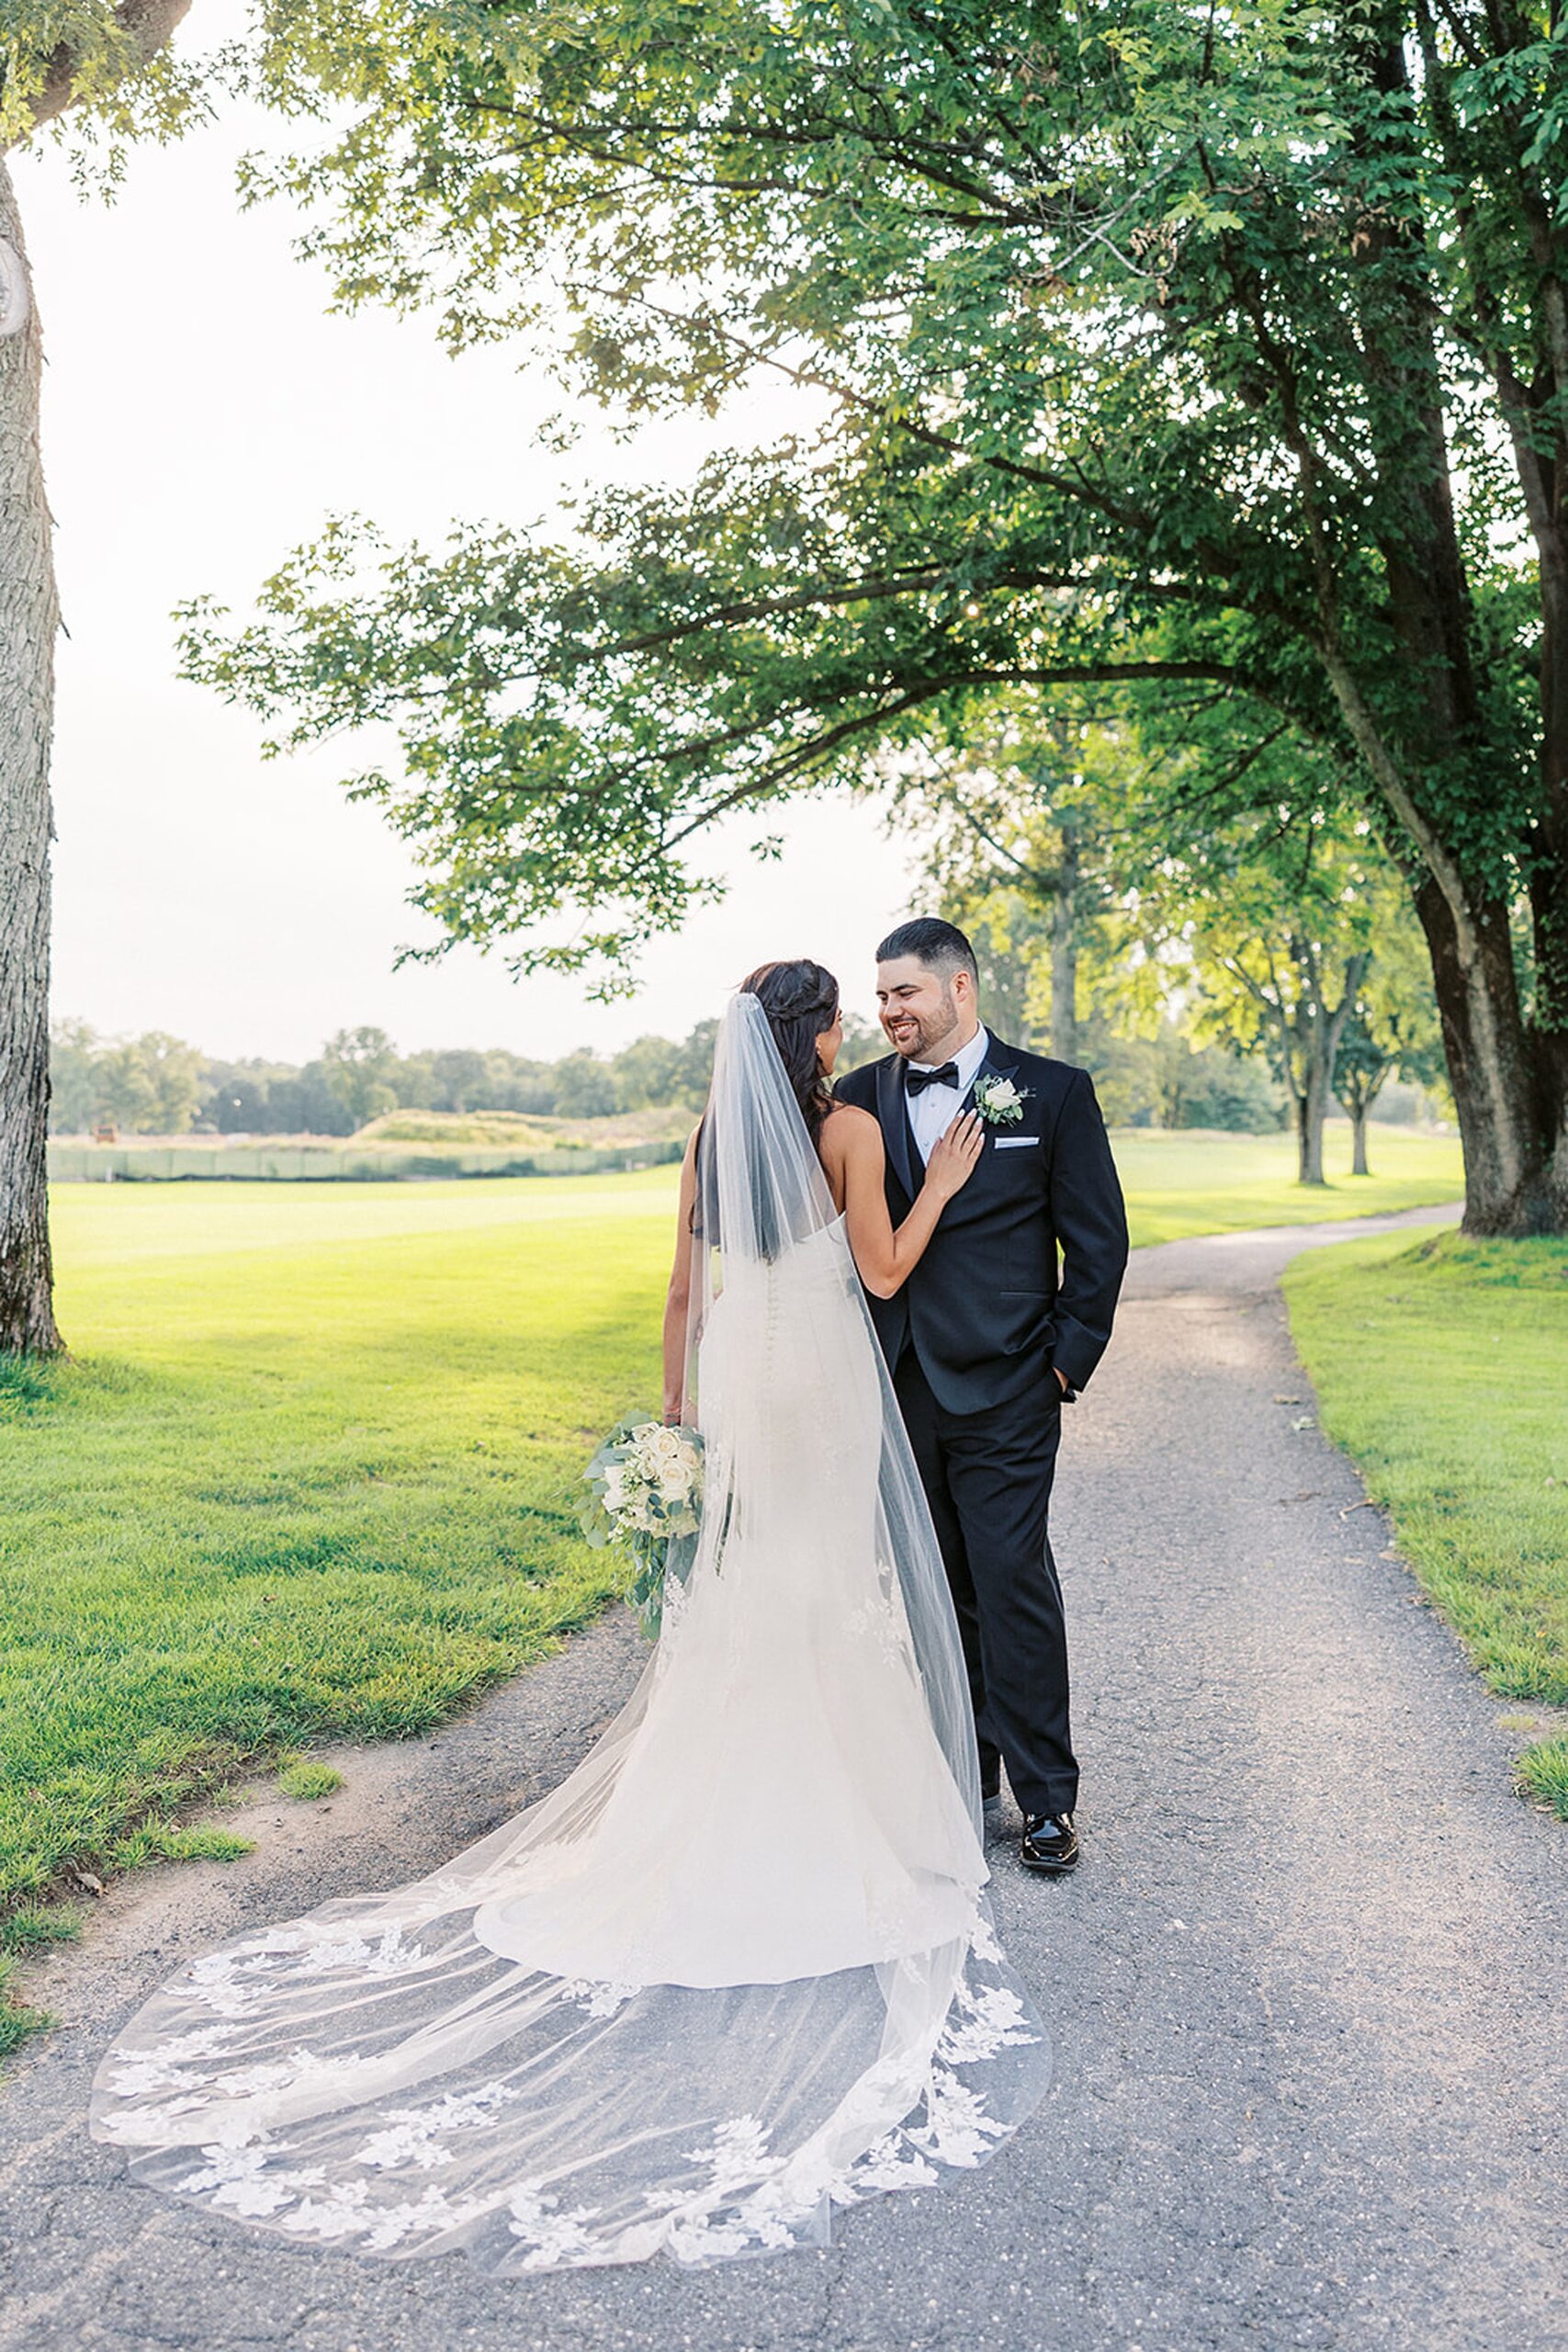 A bride in a long flowing veil and white dress rests her hand on her groom's chest while standing in a golf course path